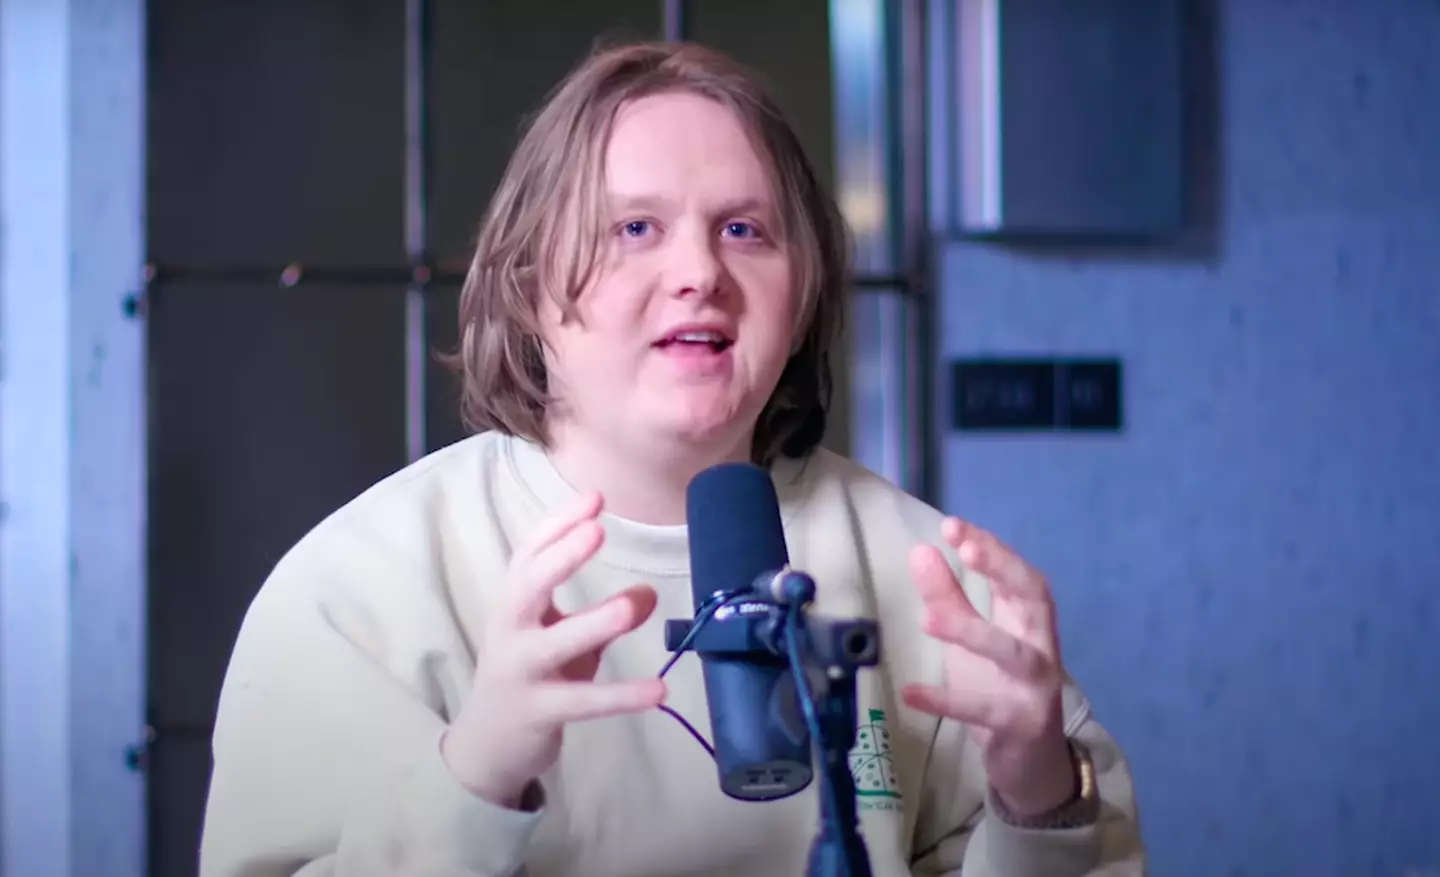 Lewis Capaldi has bravely opened up about his mental health struggles.